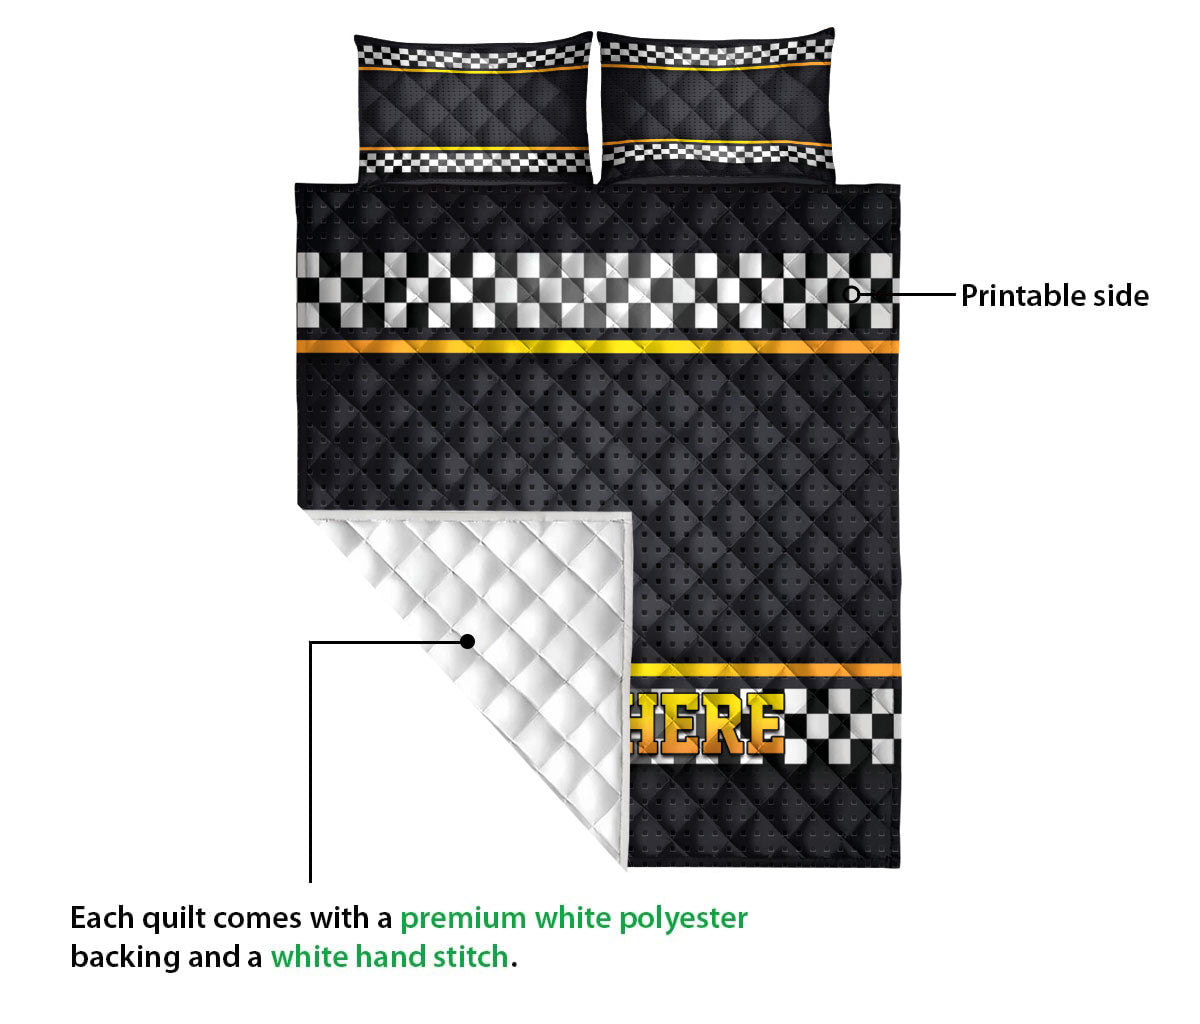 Ohaprints-Quilt-Bed-Set-Pillowcase-Racing-Race-Sheet-Structured-Metallic-Custom-Personalized-Name-Blanket-Bedspread-Bedding-3322-Queen (80'' x 90'')